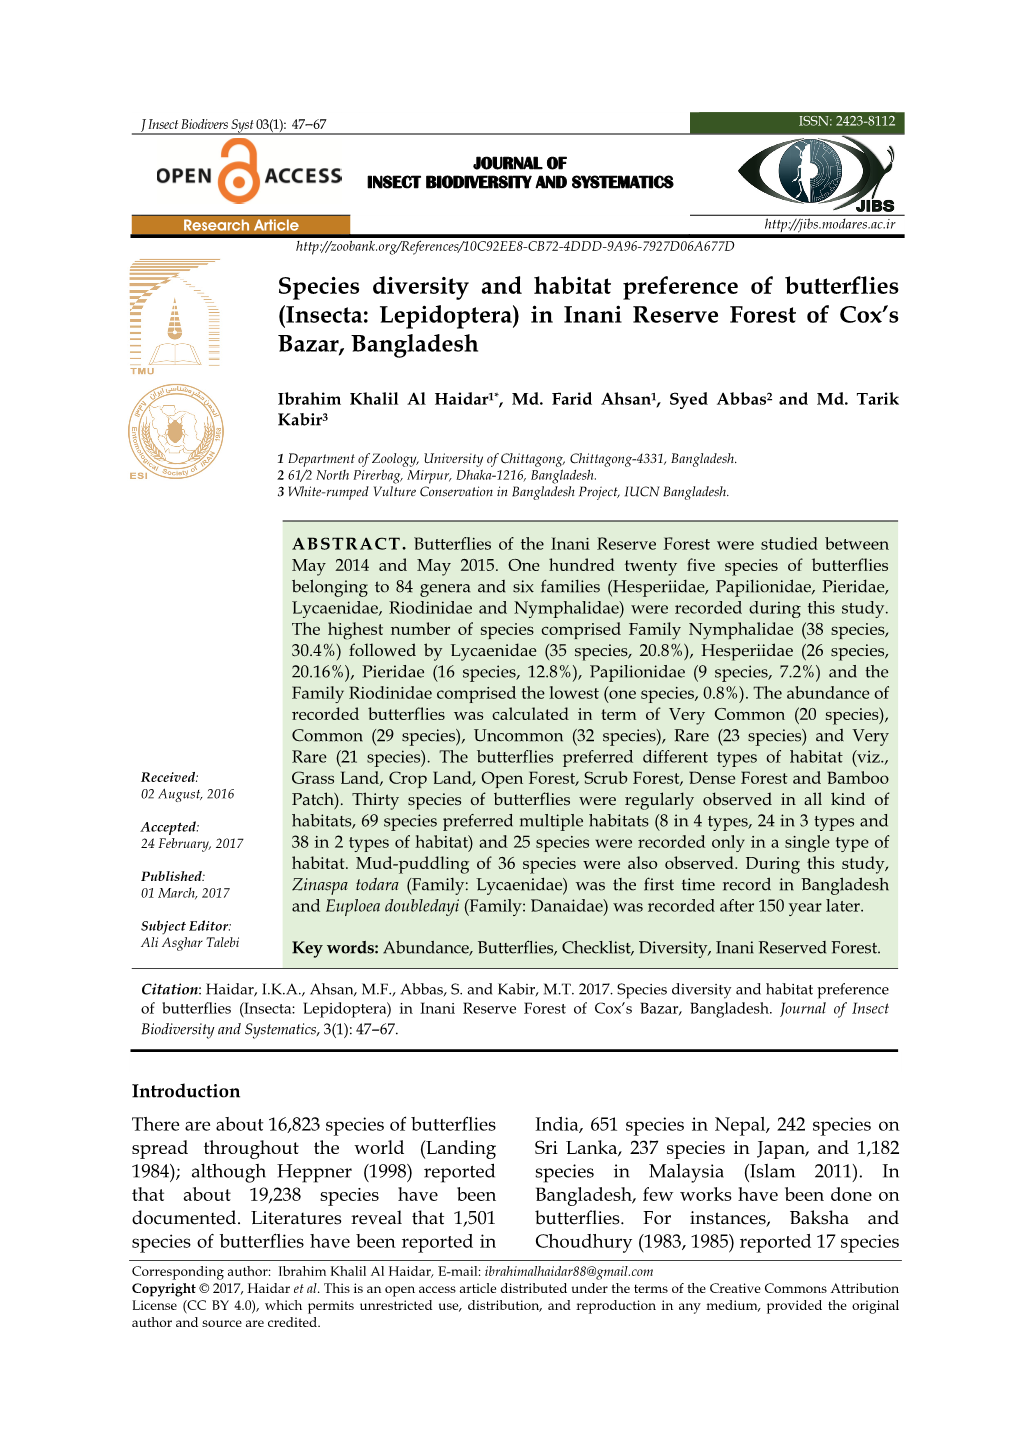 Species Diversity and Habitat Preference of Butterflies (Insecta: Lepidoptera) in Inani Reserve Forest of Cox’S Bazar, Bangladesh